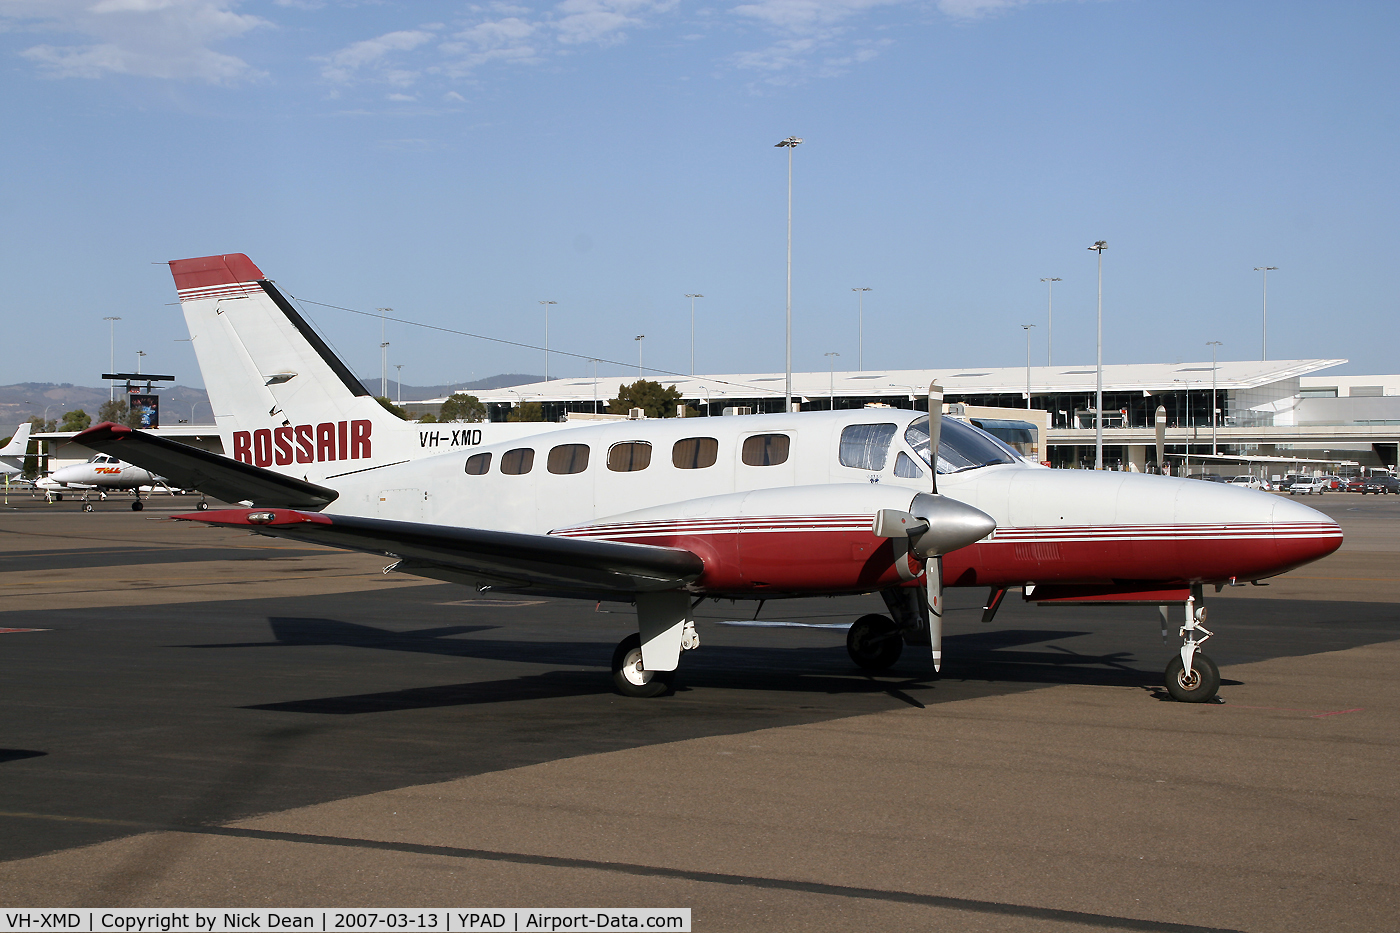 VH-XMD, 1978 Cessna 441 Conquest II C/N 441-0025, YPAD